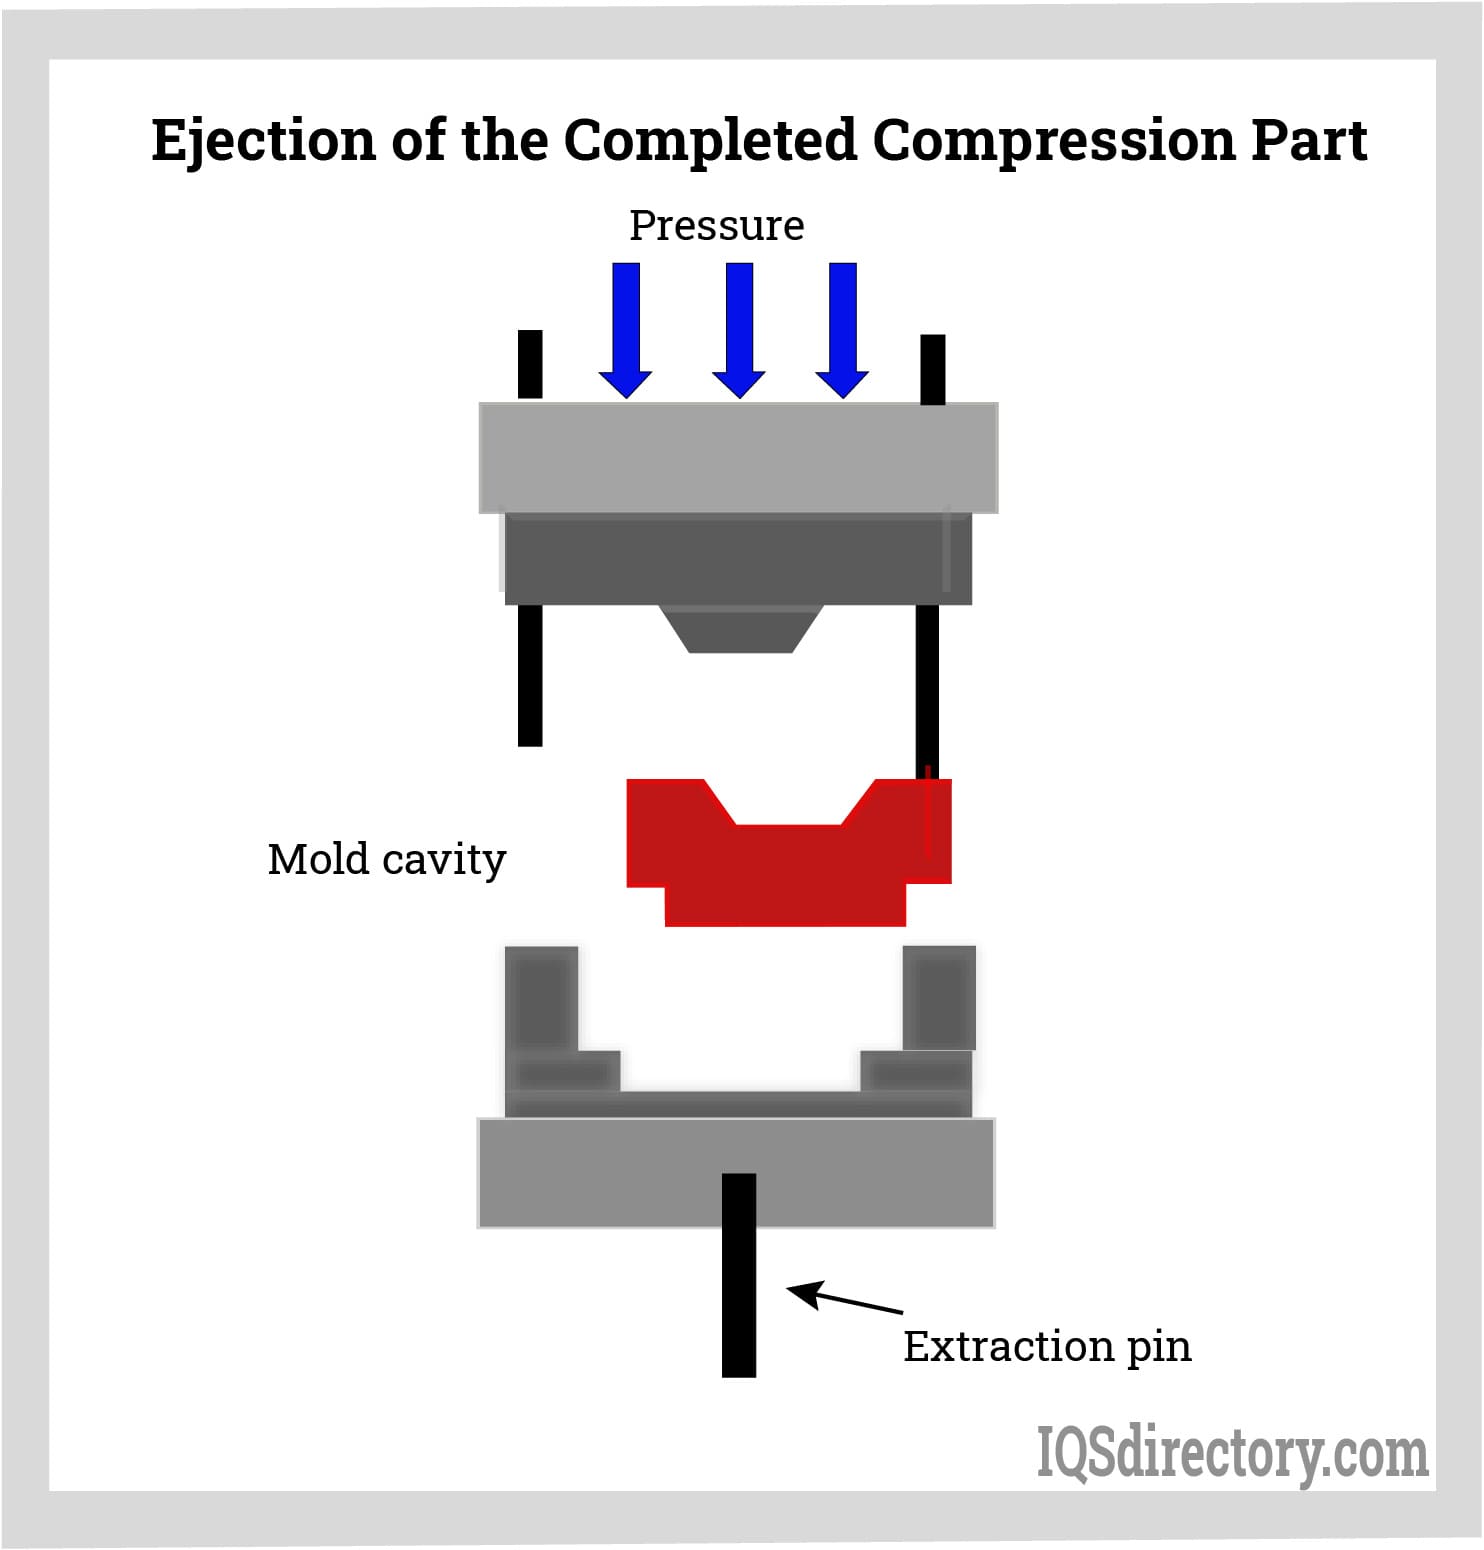 Ejection of the Completed Compression Part